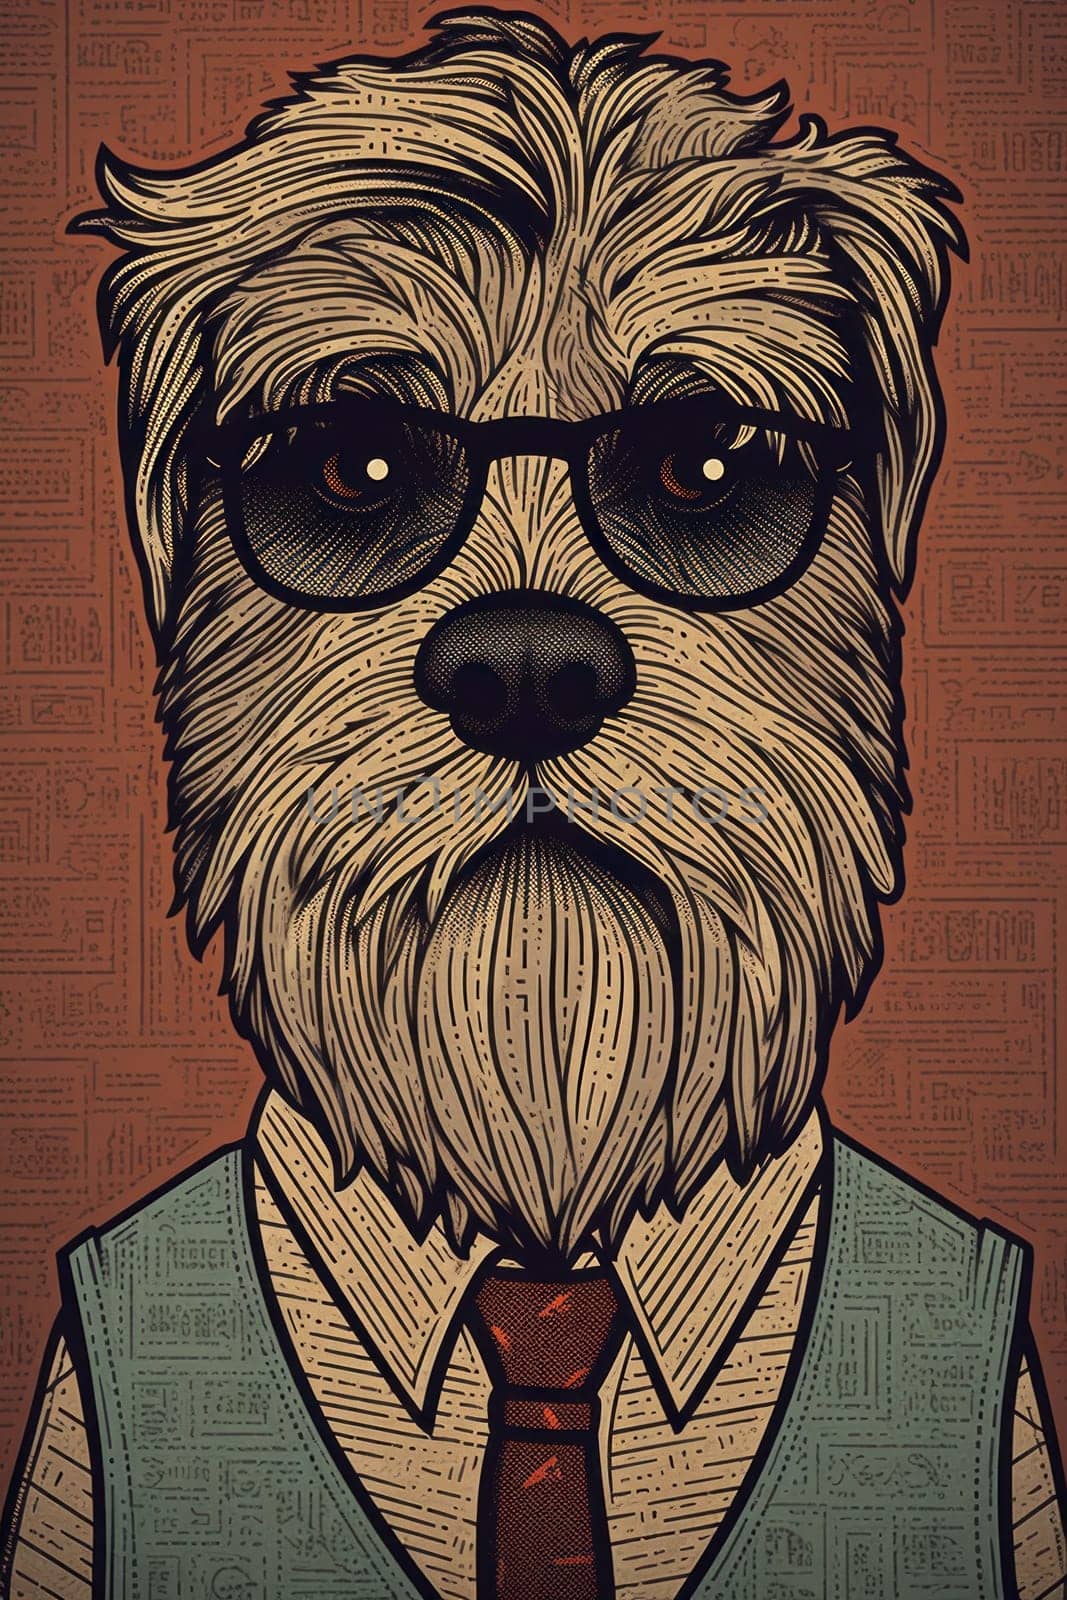 A drawing of a dog wearing a vest and tie